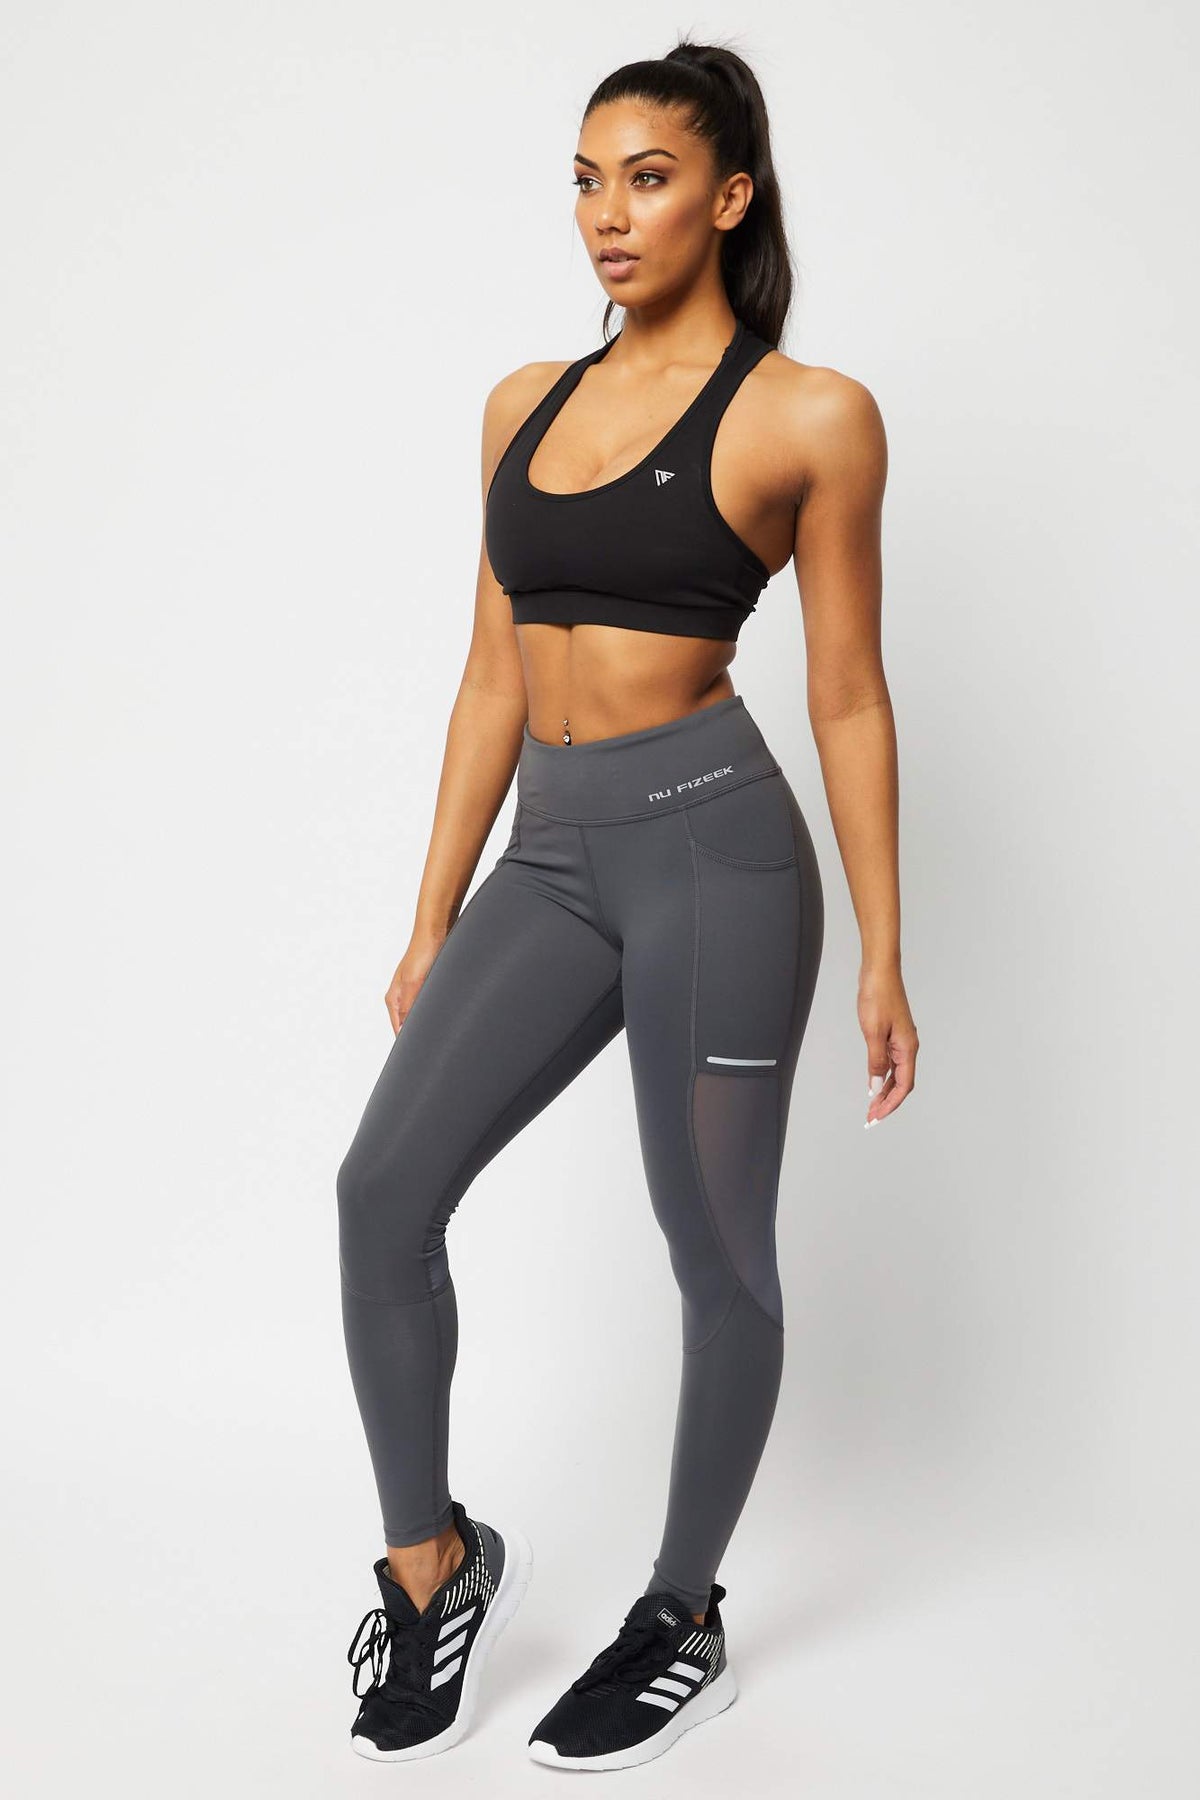 Nux Waterfall Legging - Fitness Incentive